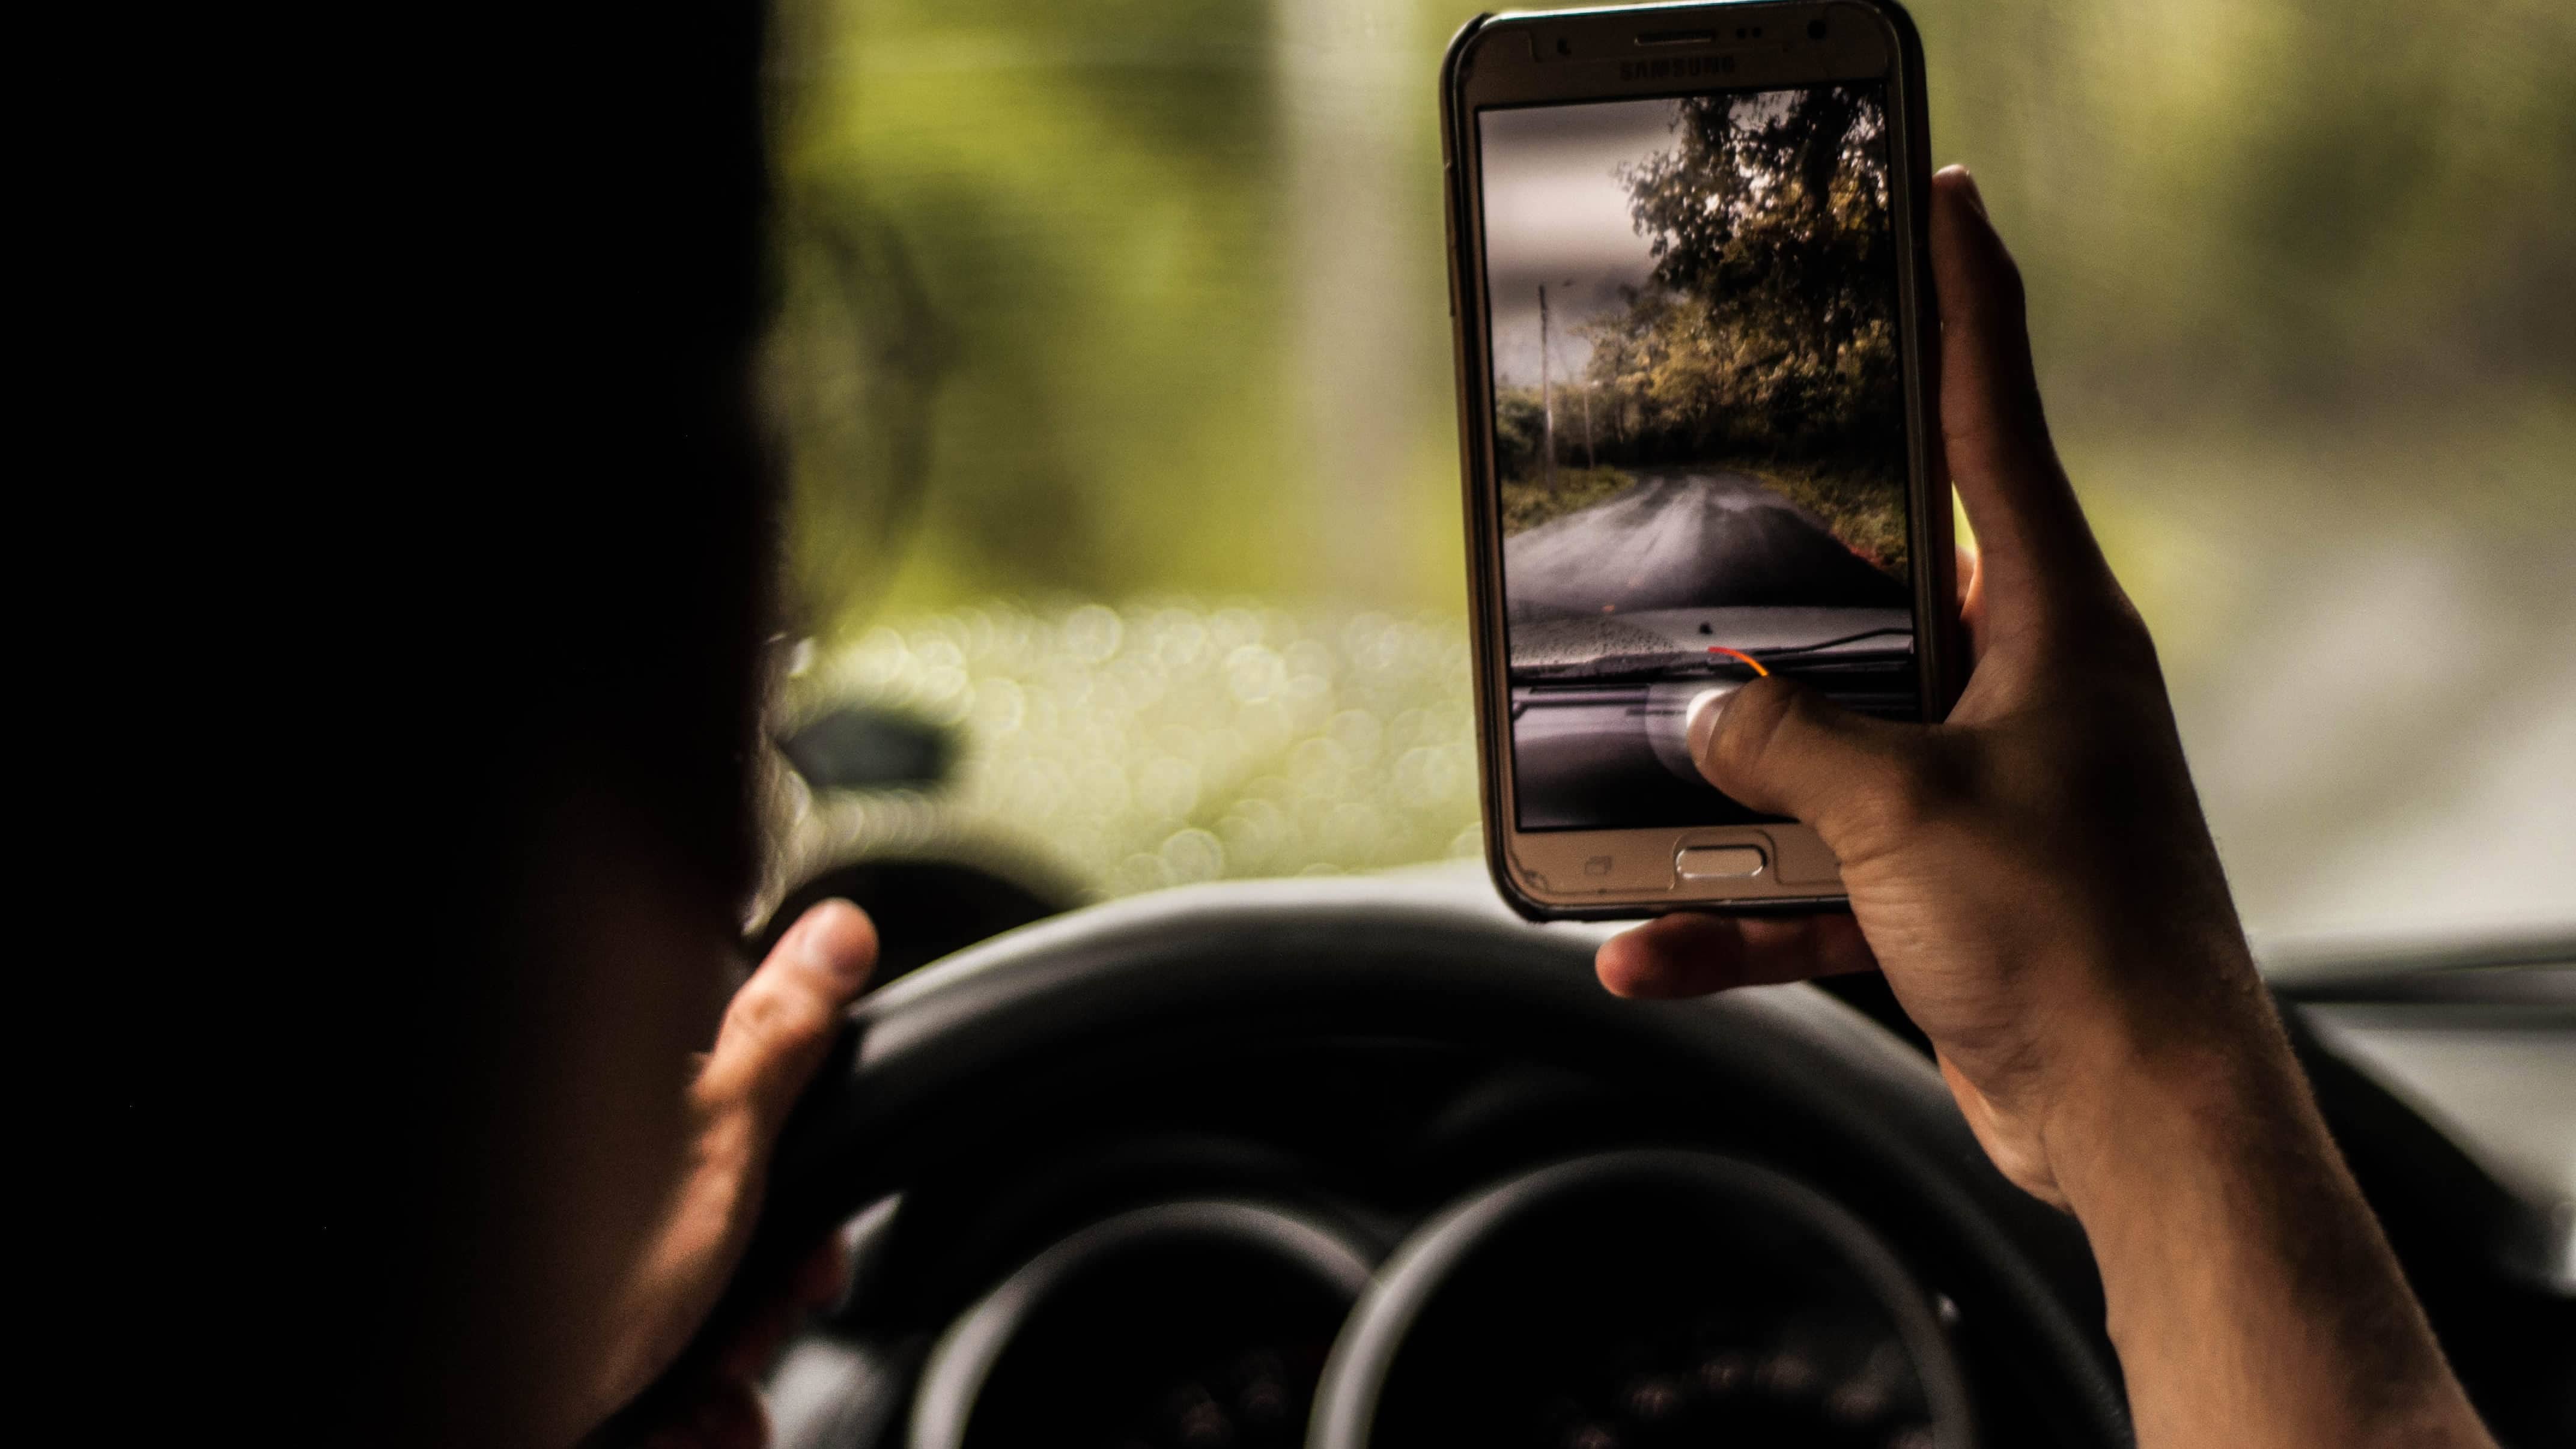 A distracted driver takes a picture of the road in front of him